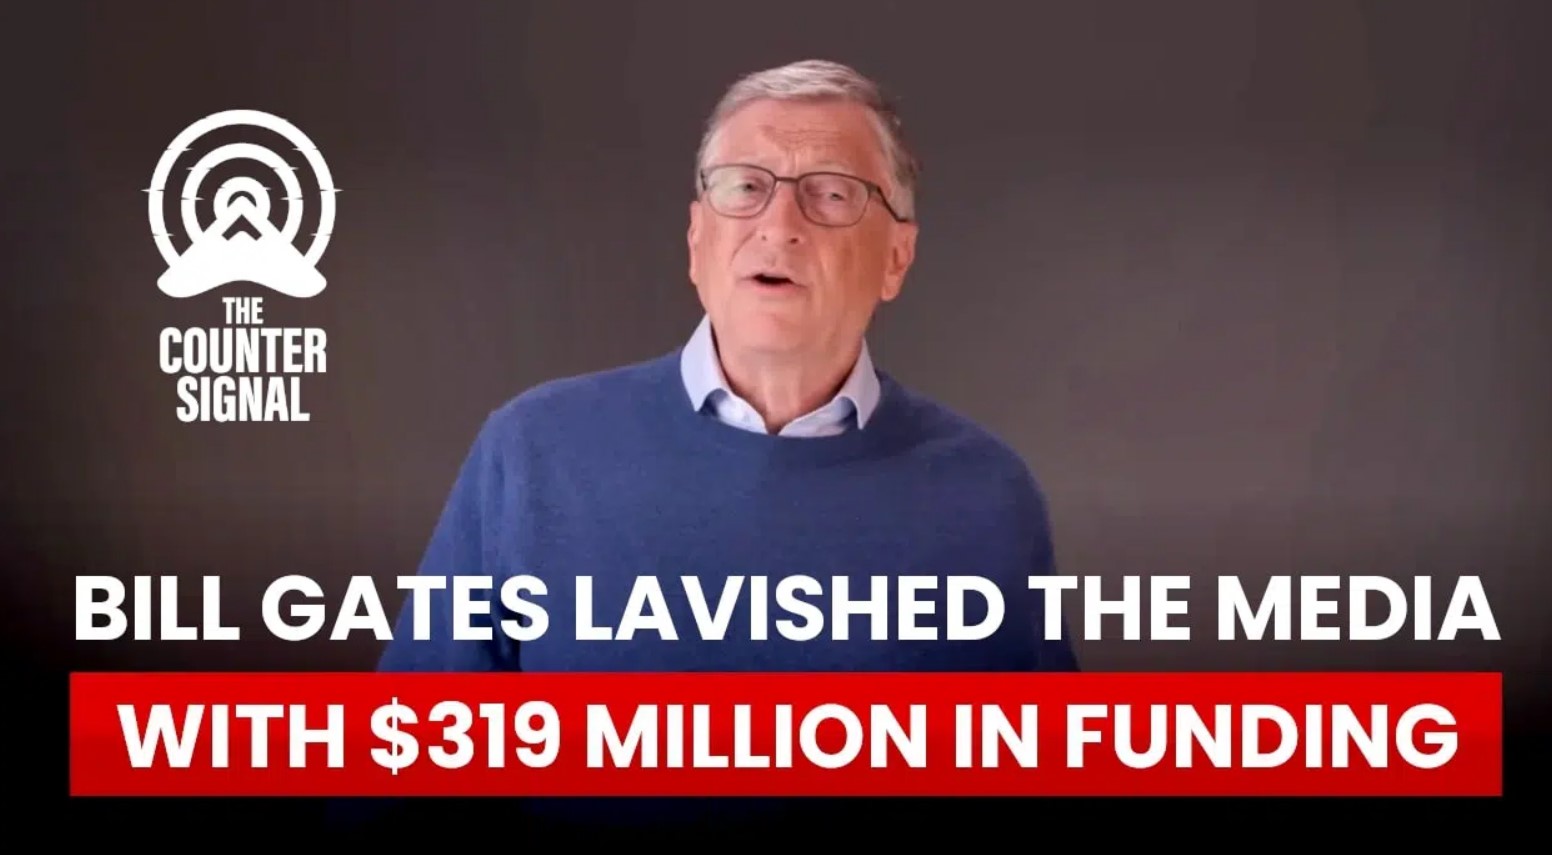 Bill Gates Lavished the Media with $319 Million in Funding  Funding